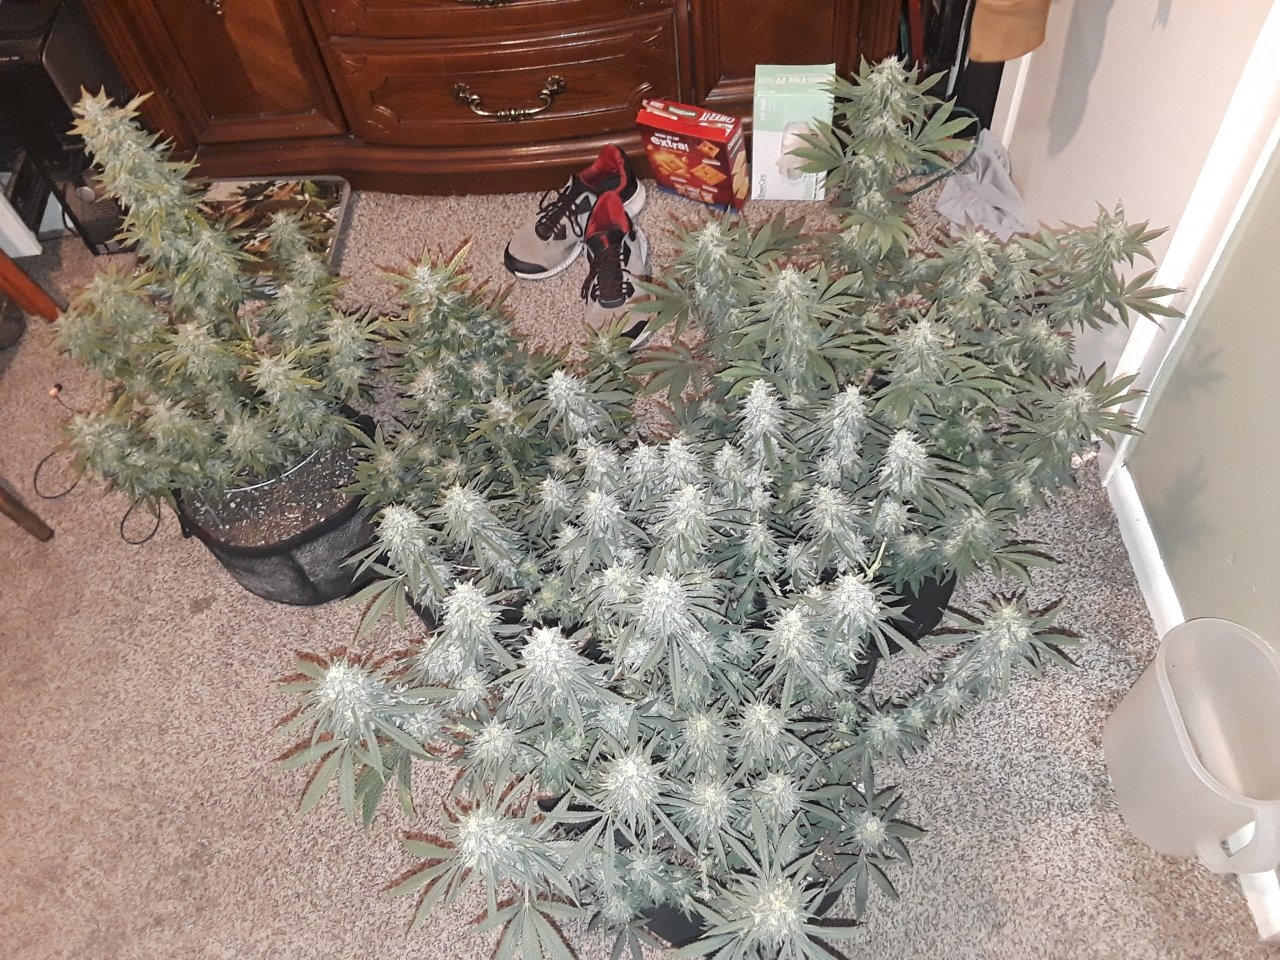 About a week away from harvest